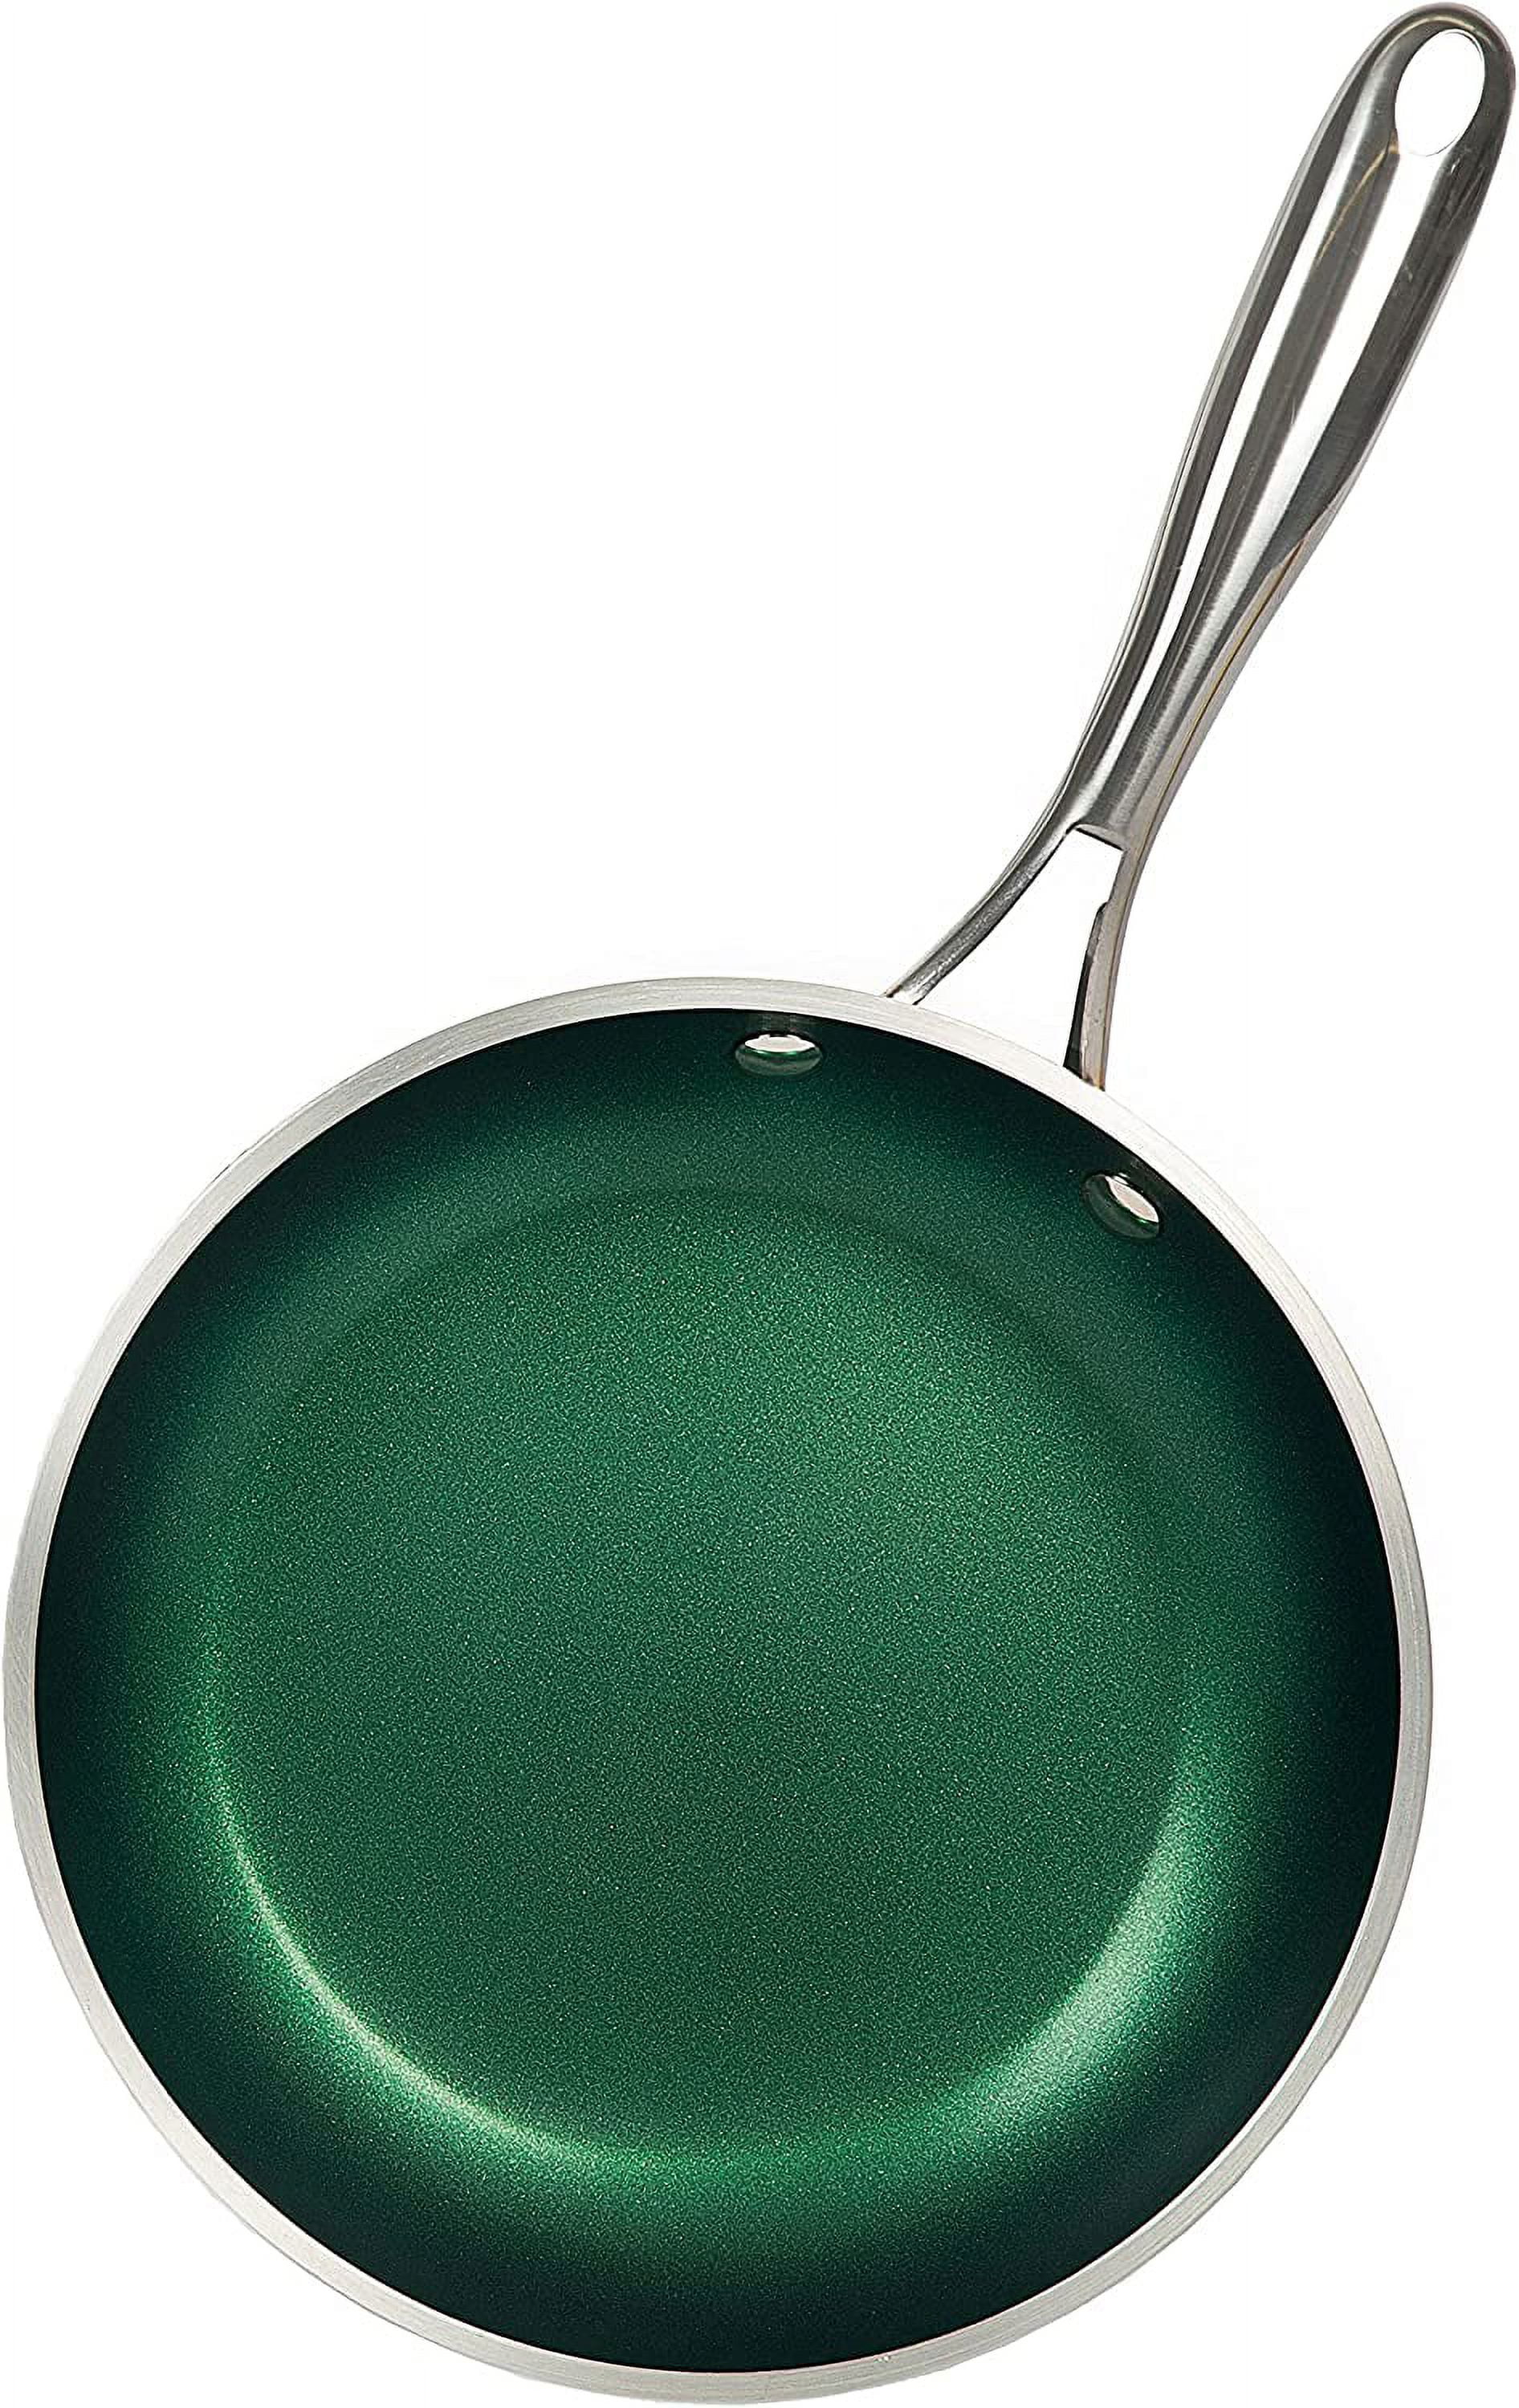 Greendi YMX8324 Nonstick Frying Pan Non Stick Skillet with Glass Lid 10-Inch Round Aluminum Saute Pan for Gas, Electric and